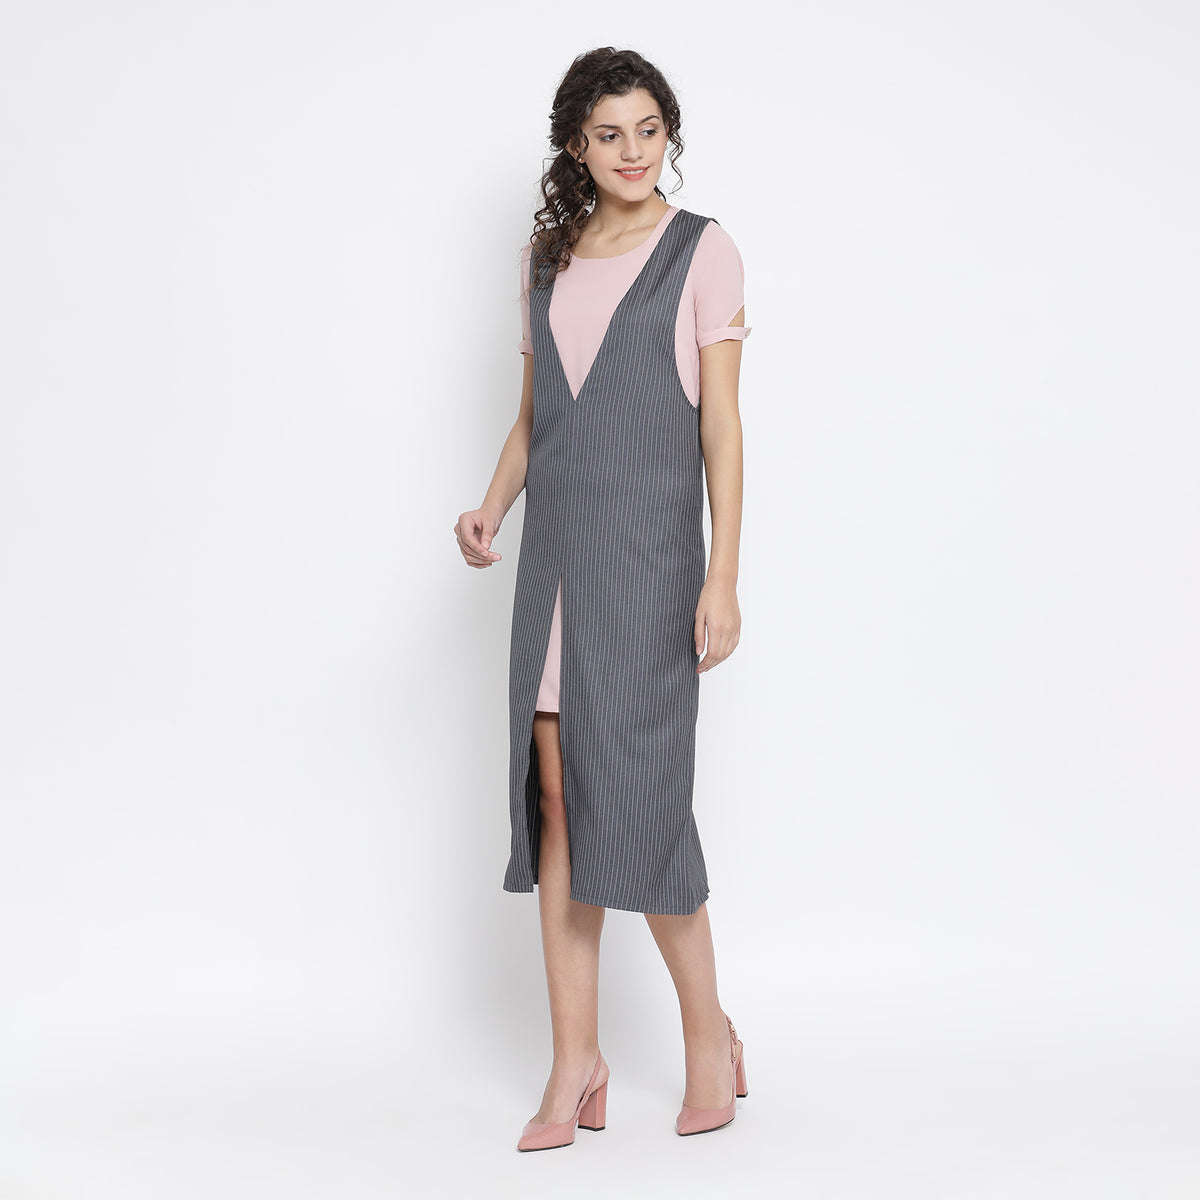 Grey Stripe Dress With Pink Georgette Tunic